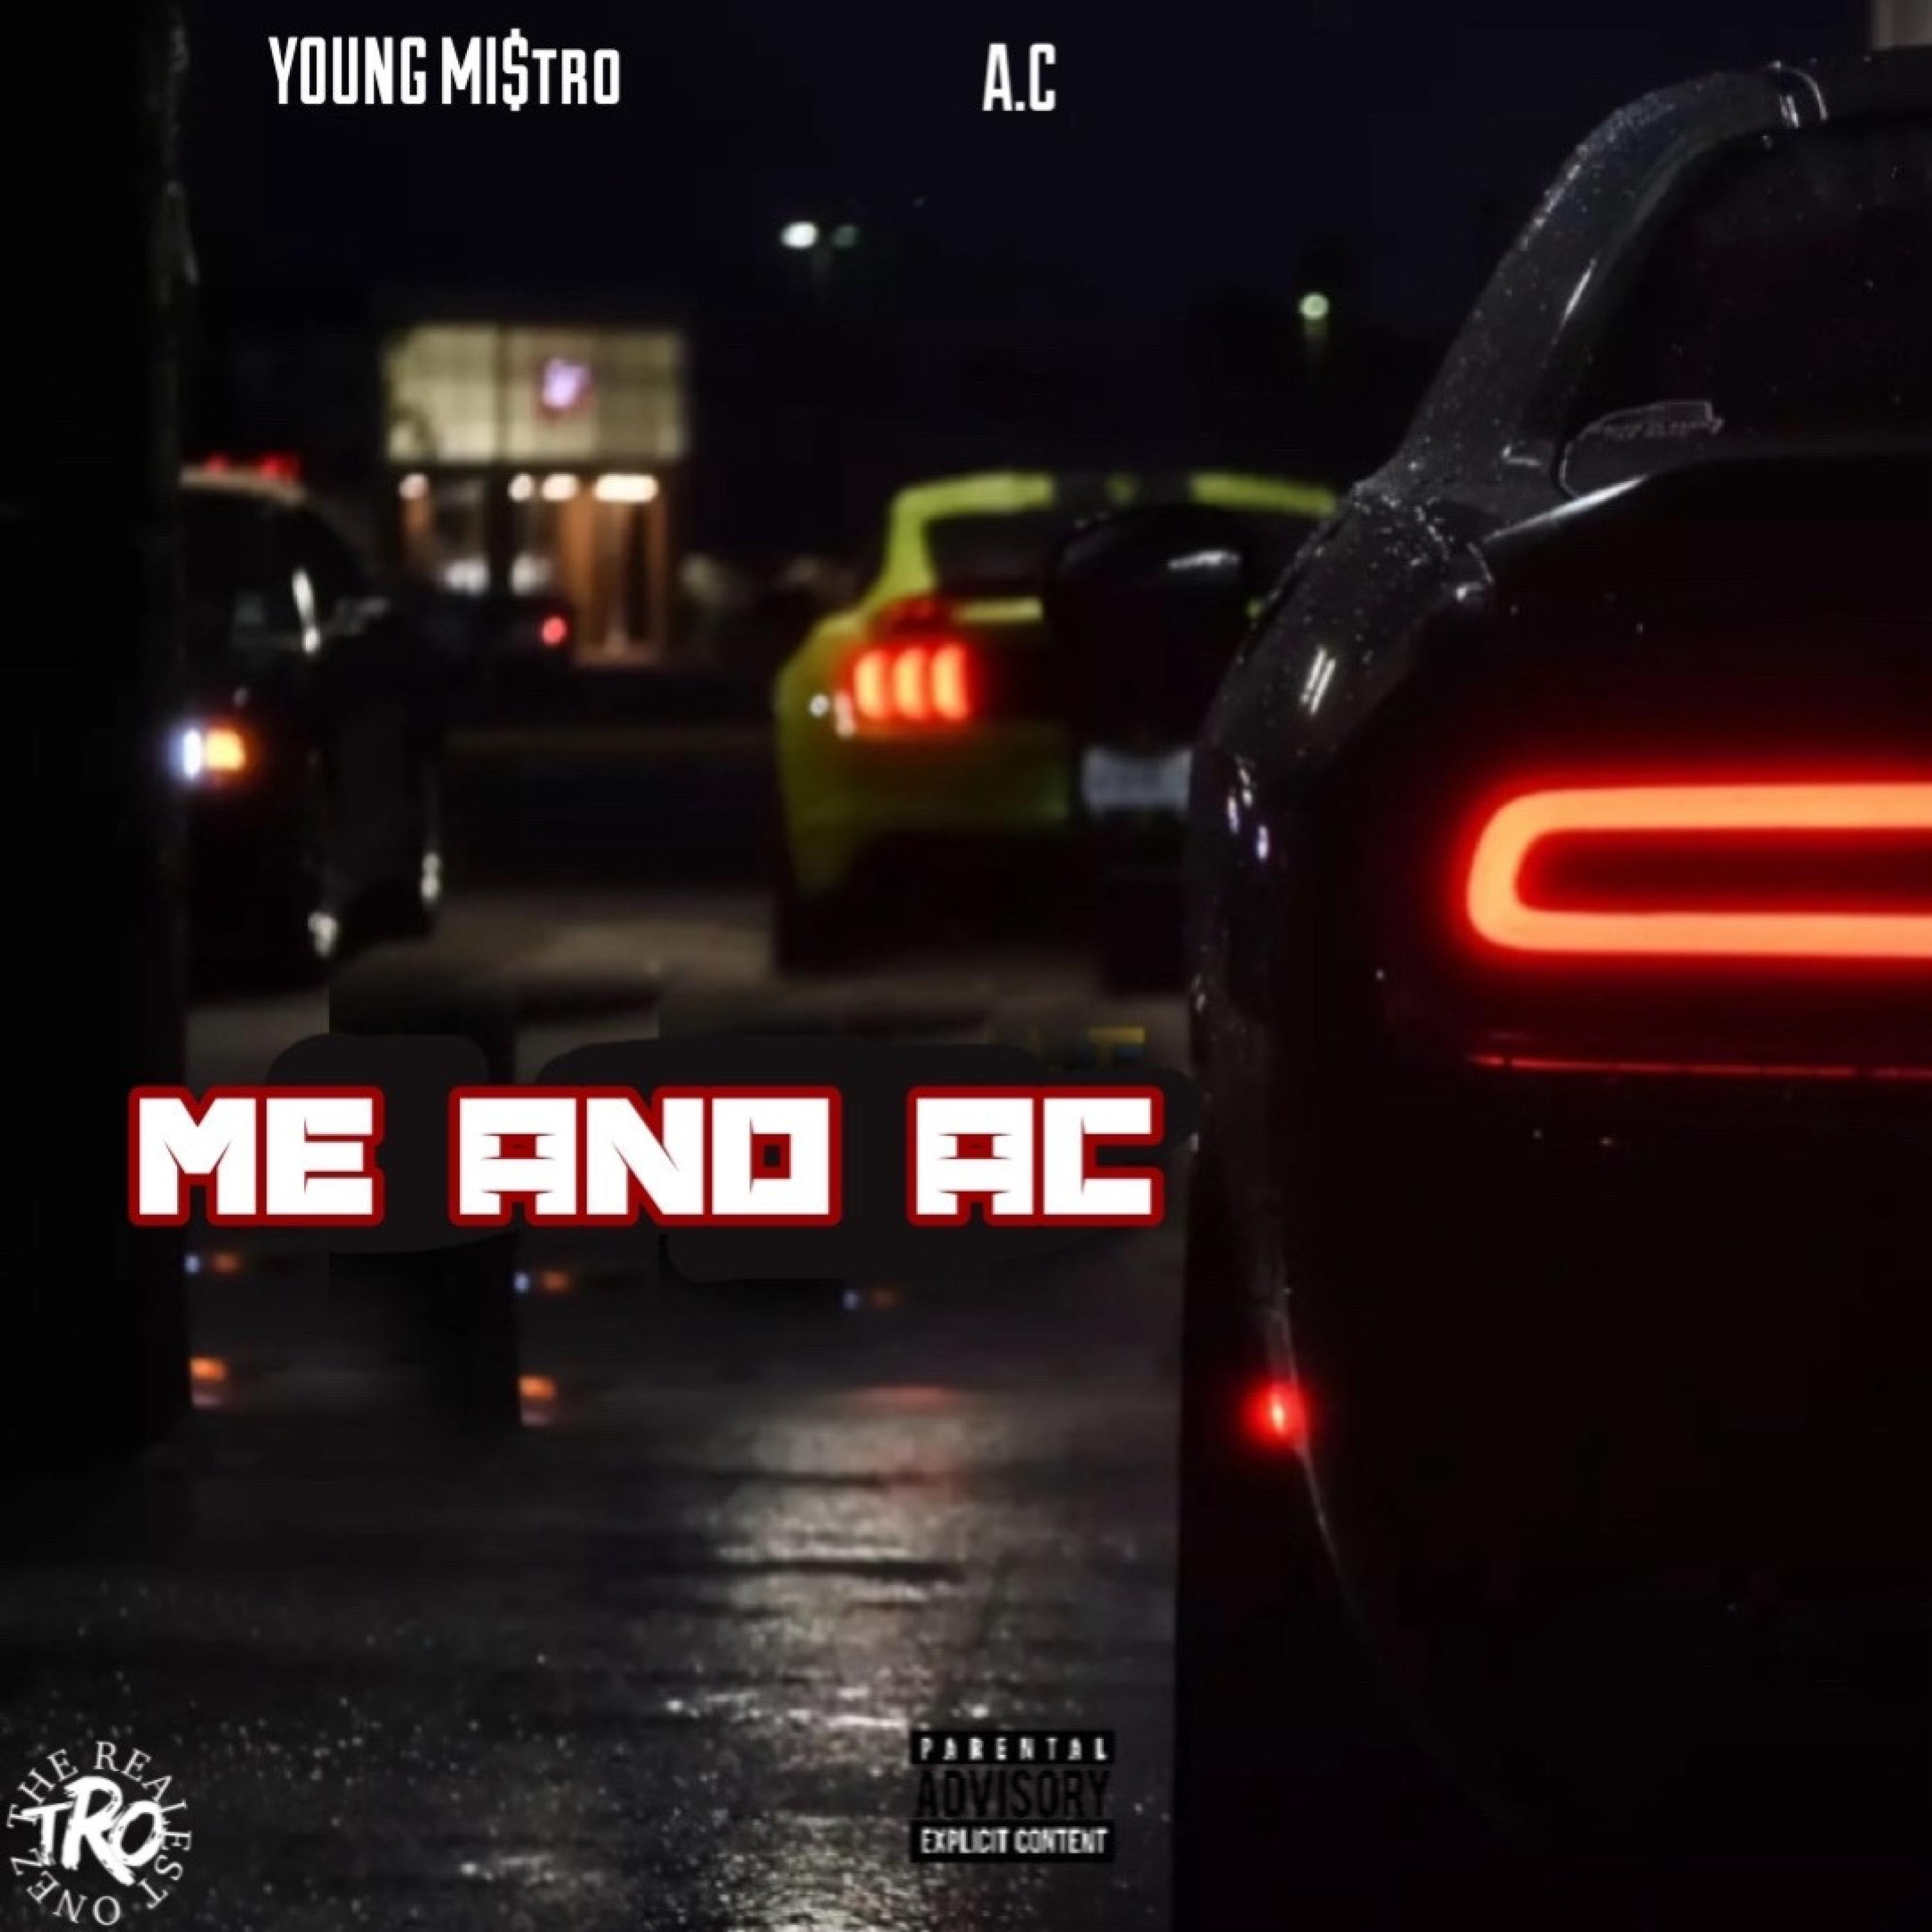 Young Mistro - Me and A.C. (feat. A.C.)